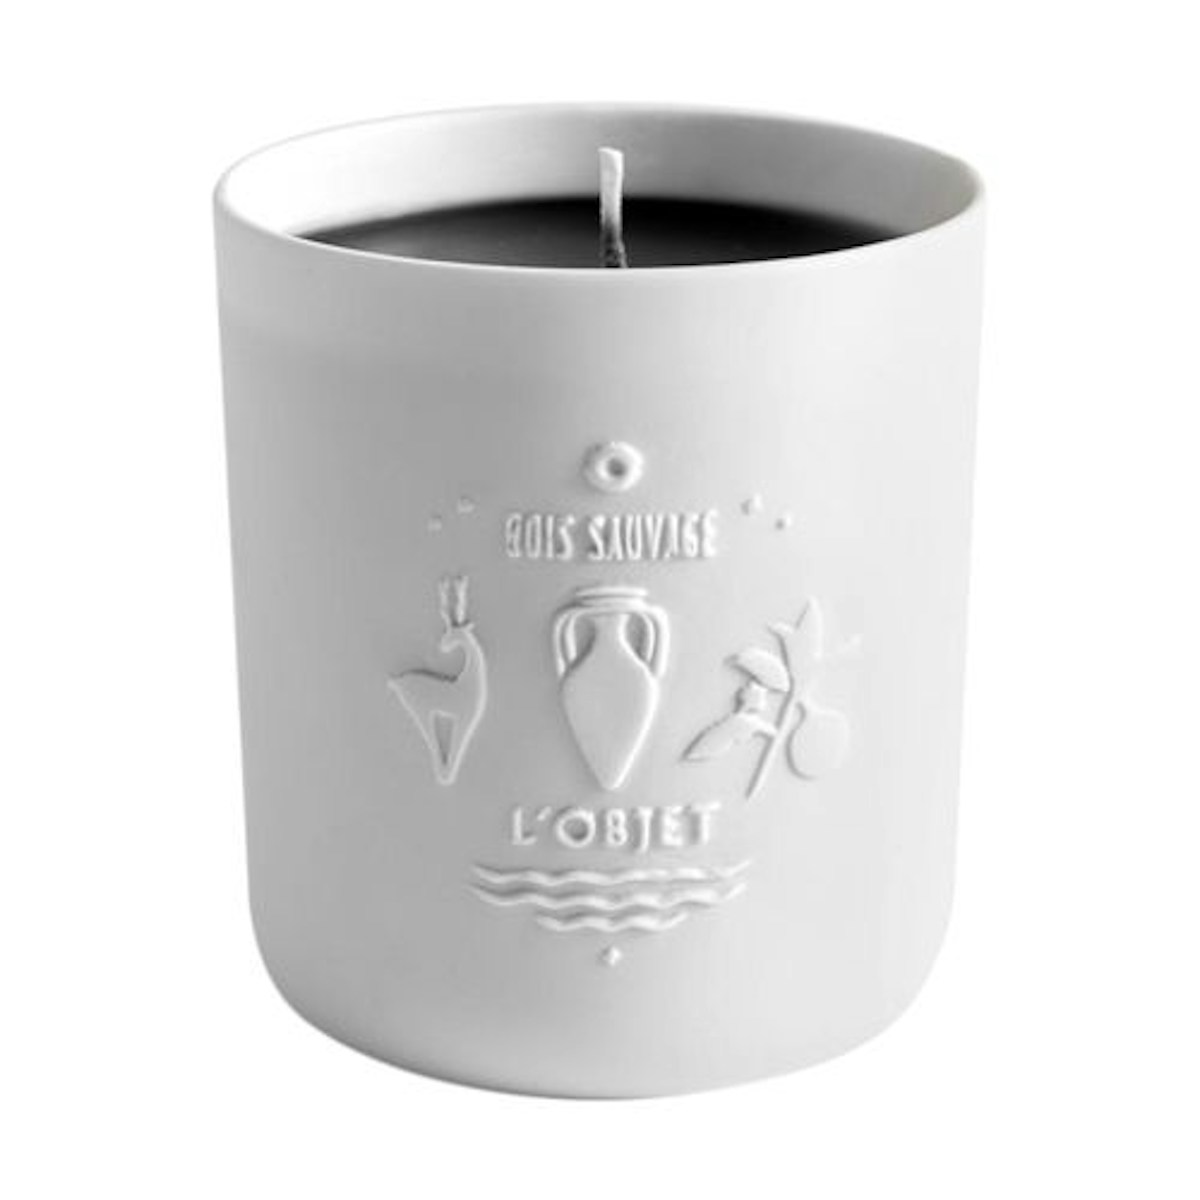 Bois Sauvage Candle - 12 Best Scented Candles & Fragrances For Your Home - Style Guide - LuxDeco.com